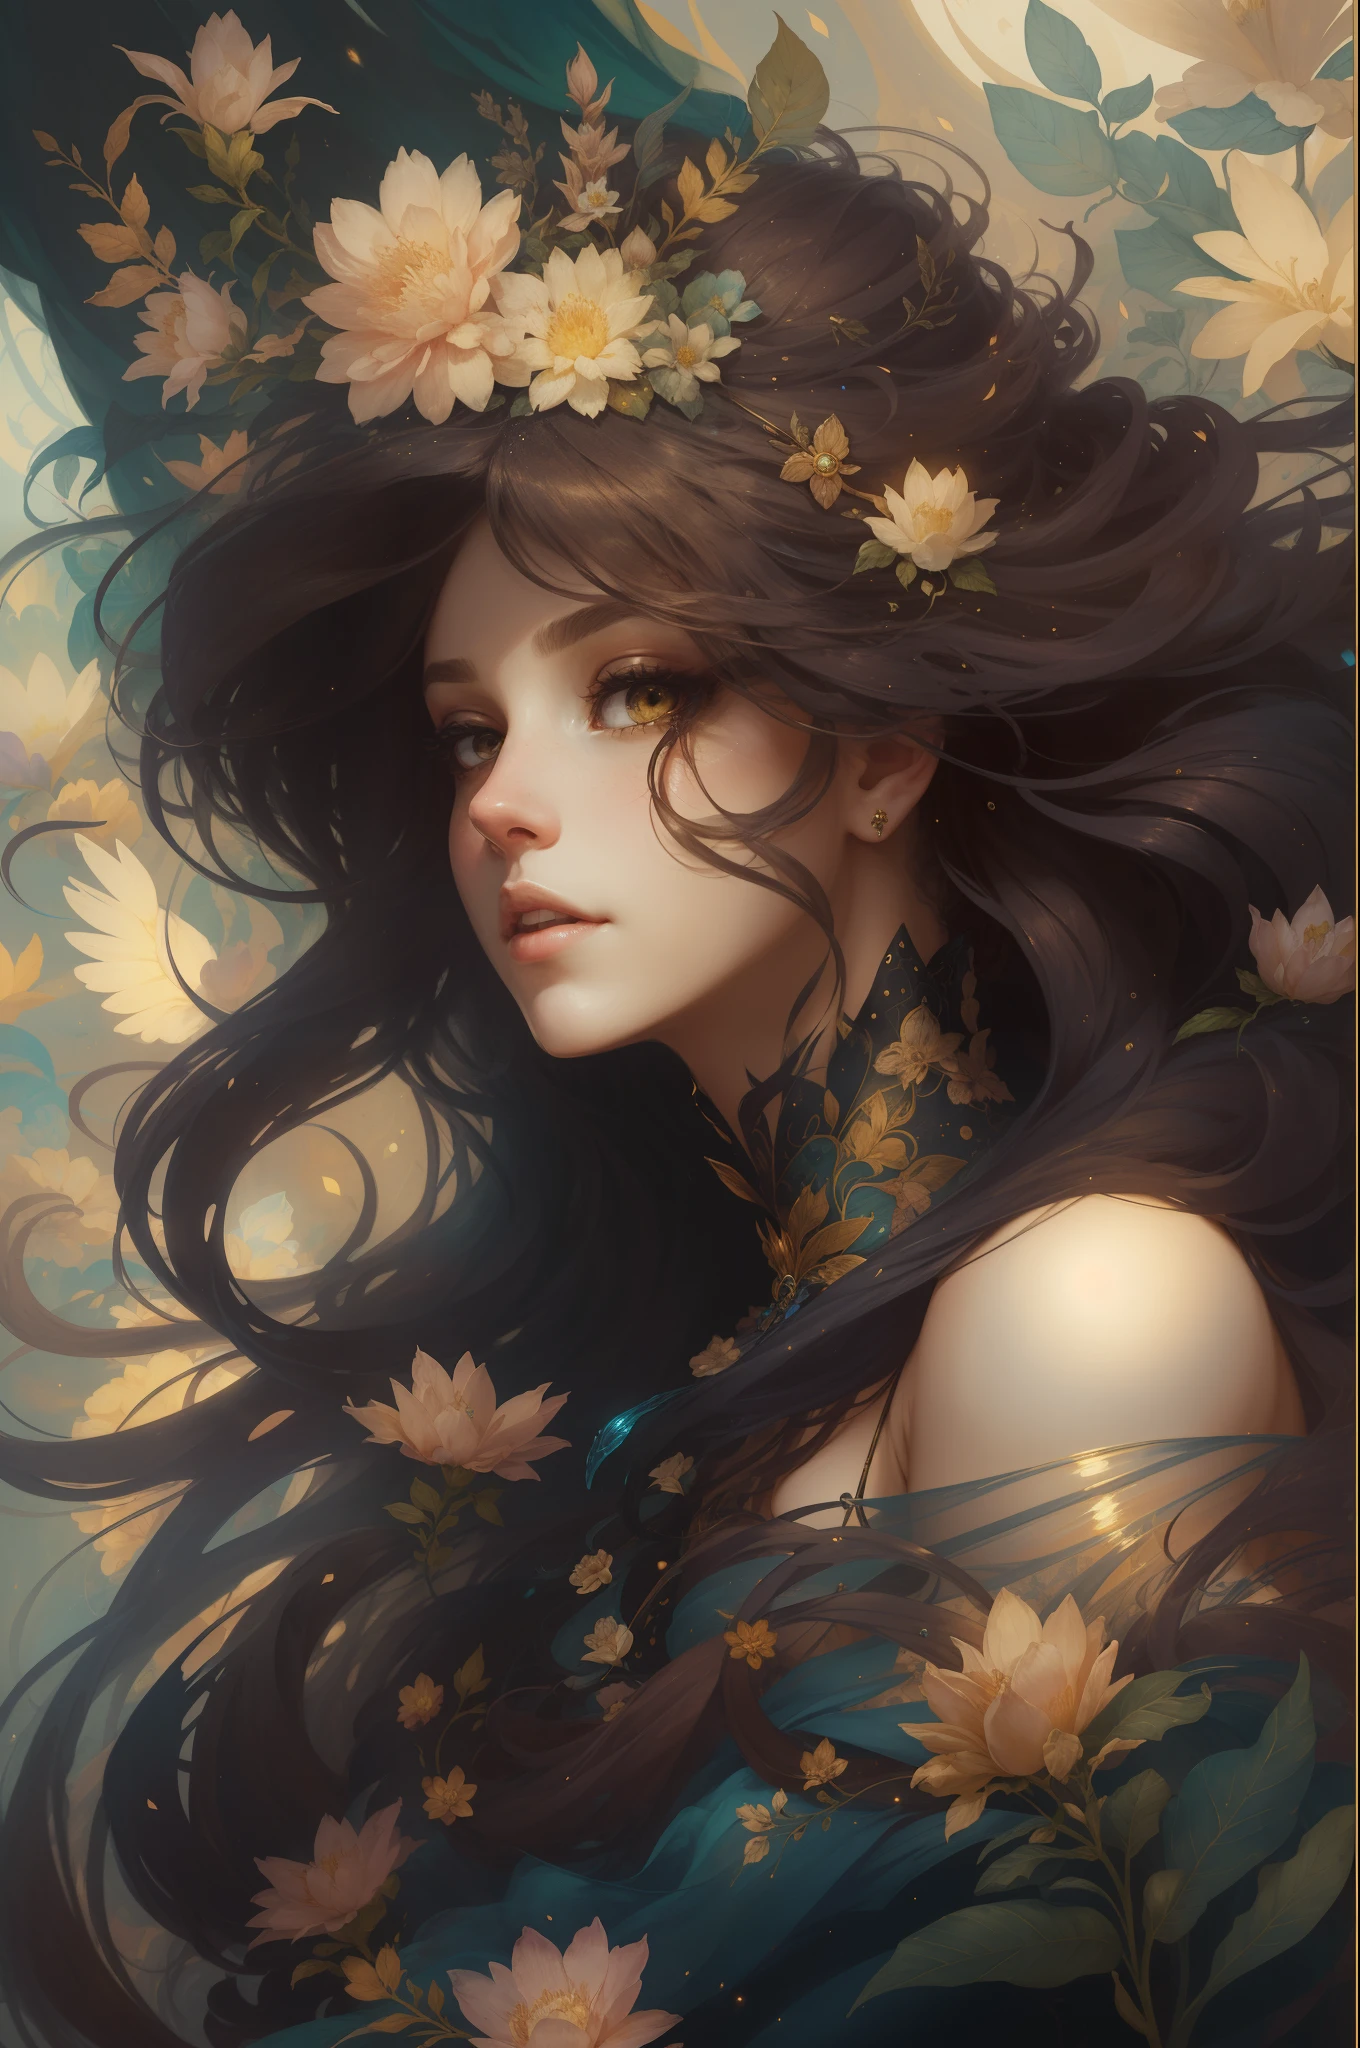 （（Gorgeous female princess）），（She has long flowing brown hair），（Bright and beautiful eyes），trendding on artstation，Flowers of Hope by Jean-Honor Fragonard，Peter Mohrbacher，ultra-detailliert，insanely details, Amazing, complex, elite, Art Nouveau, a gorgeous, Liquid wax, elegant, Luxurious, greg rutkovsky, Ink style, a sticker, Vector art beautiful character design, Dual exposure shooting, Luminous design, winning artwork, tmasterpiece, AMOLED black background,optic